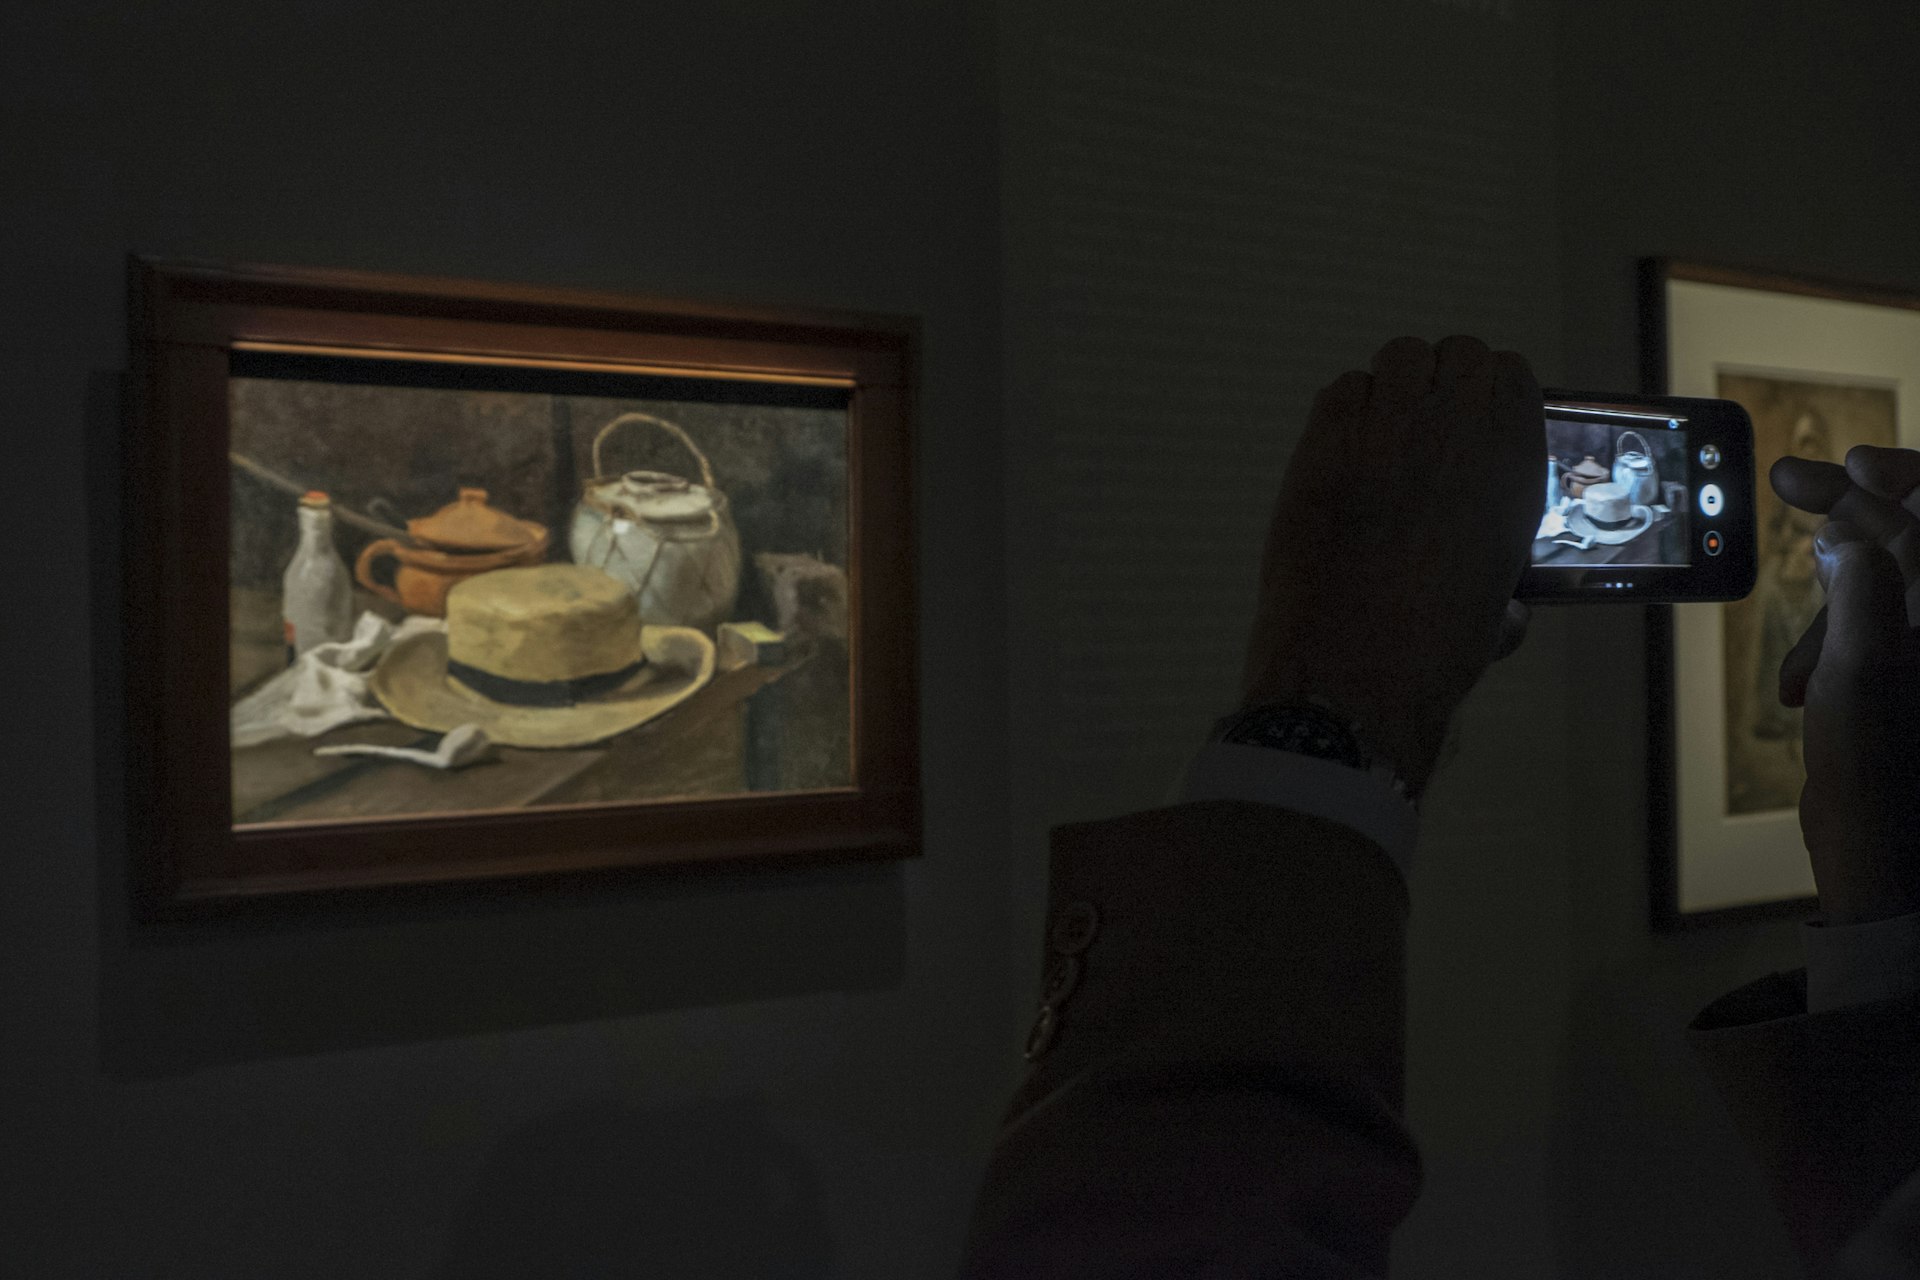 A visitors takes a photo of Van Gogh's painting Still Life with Yellow Straw Hat which hangs in the Kroller-Muller Museum in the Netherlands